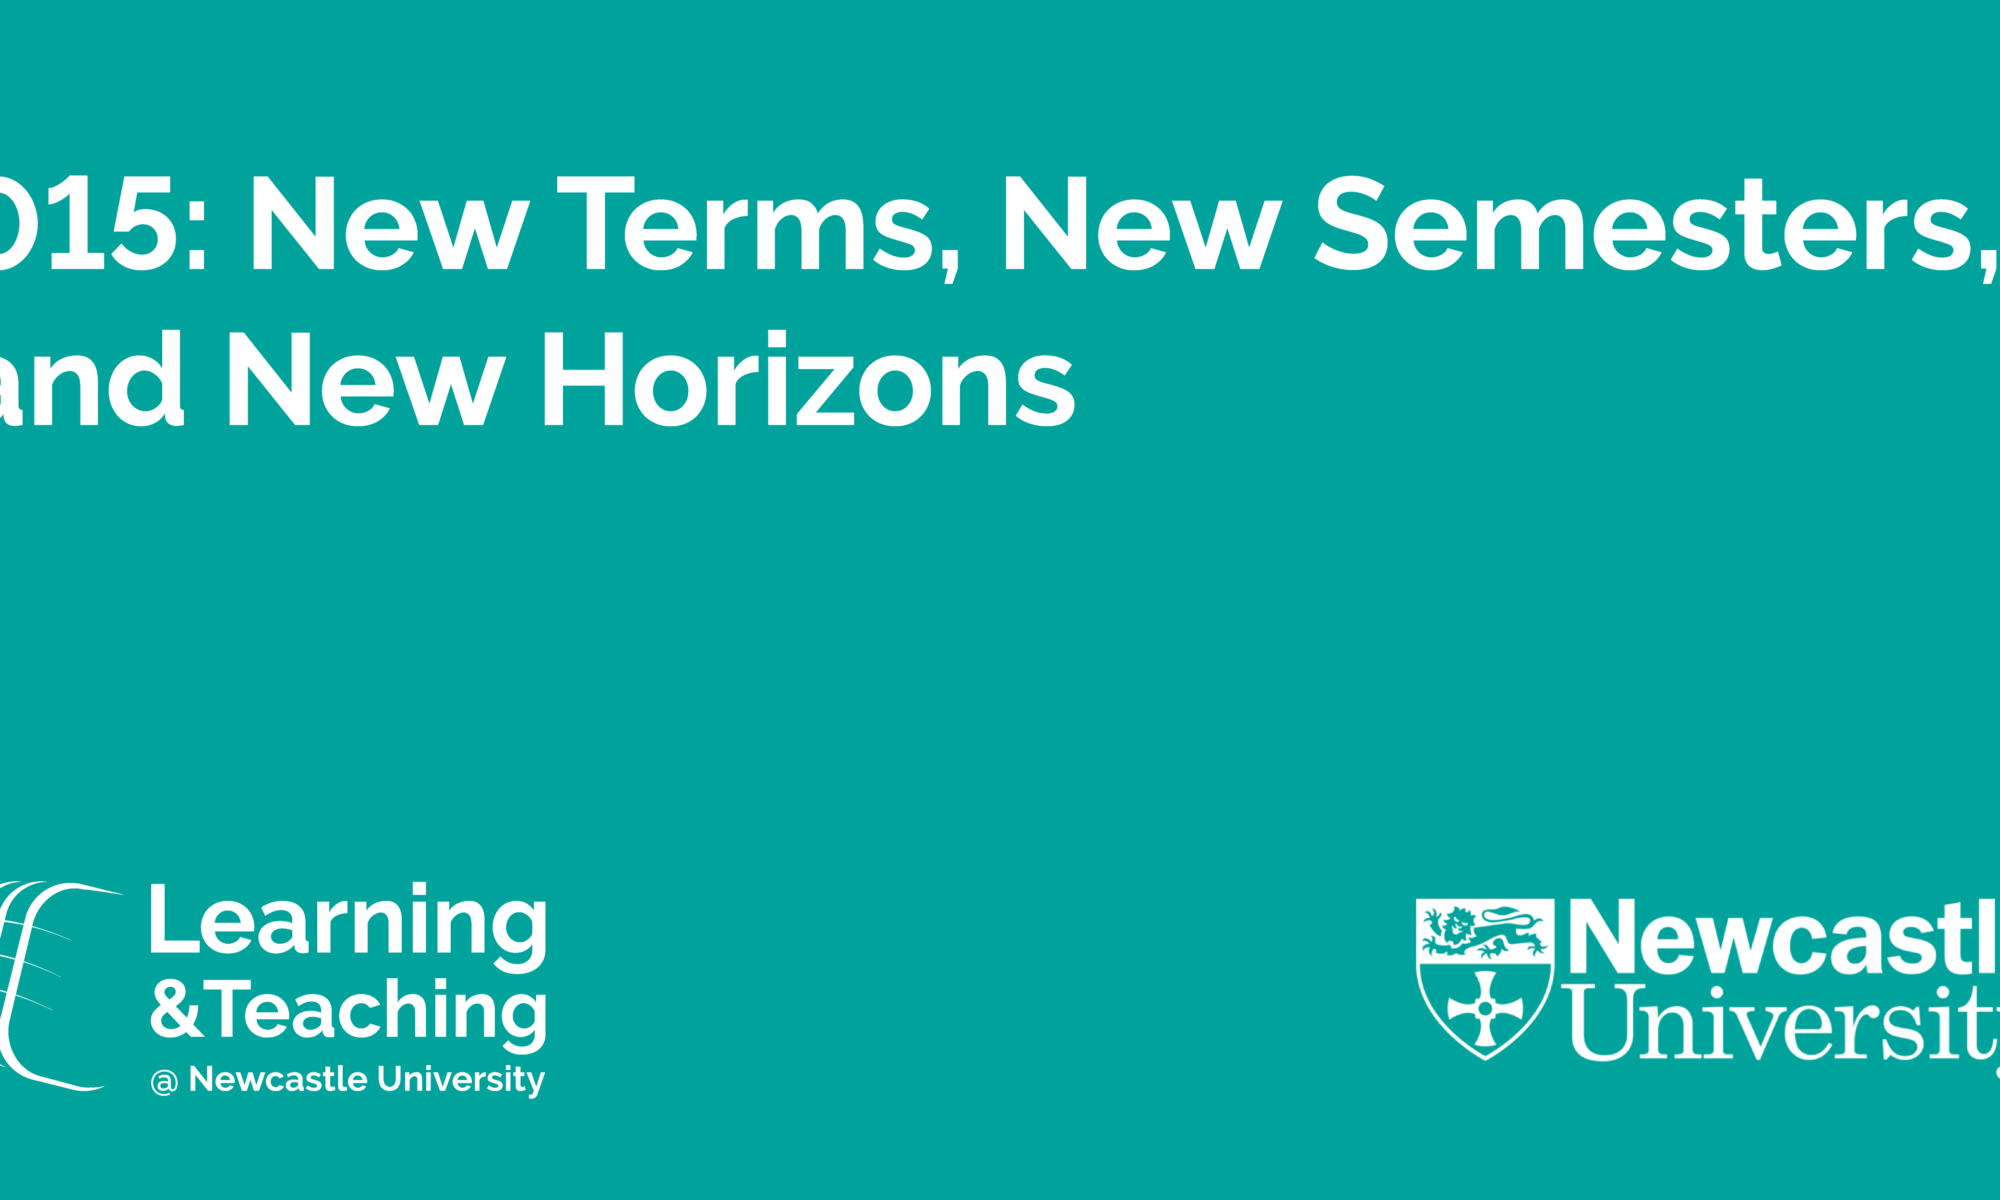 015: New Terms, New Semesters and New Horizons